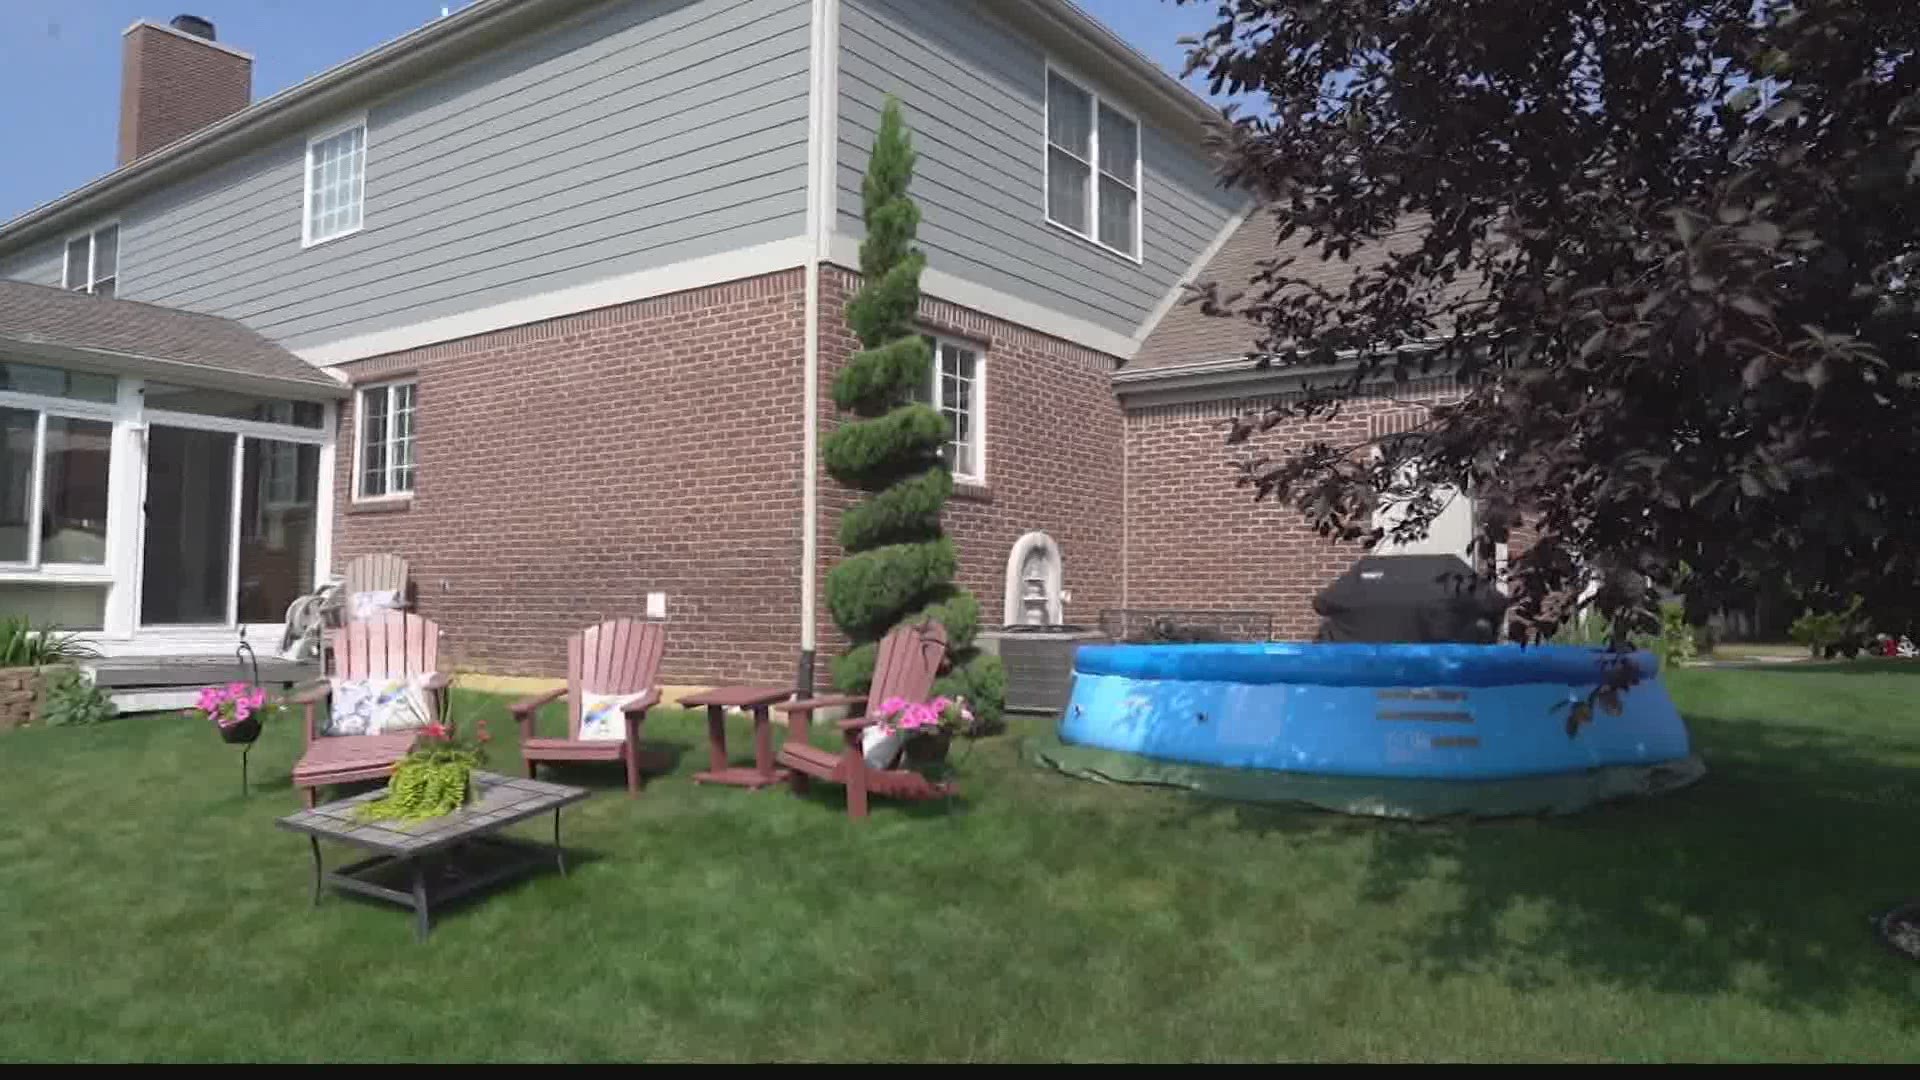 A Hamilton County family has won a battle with their homeowners' association over a backyard wading pool.